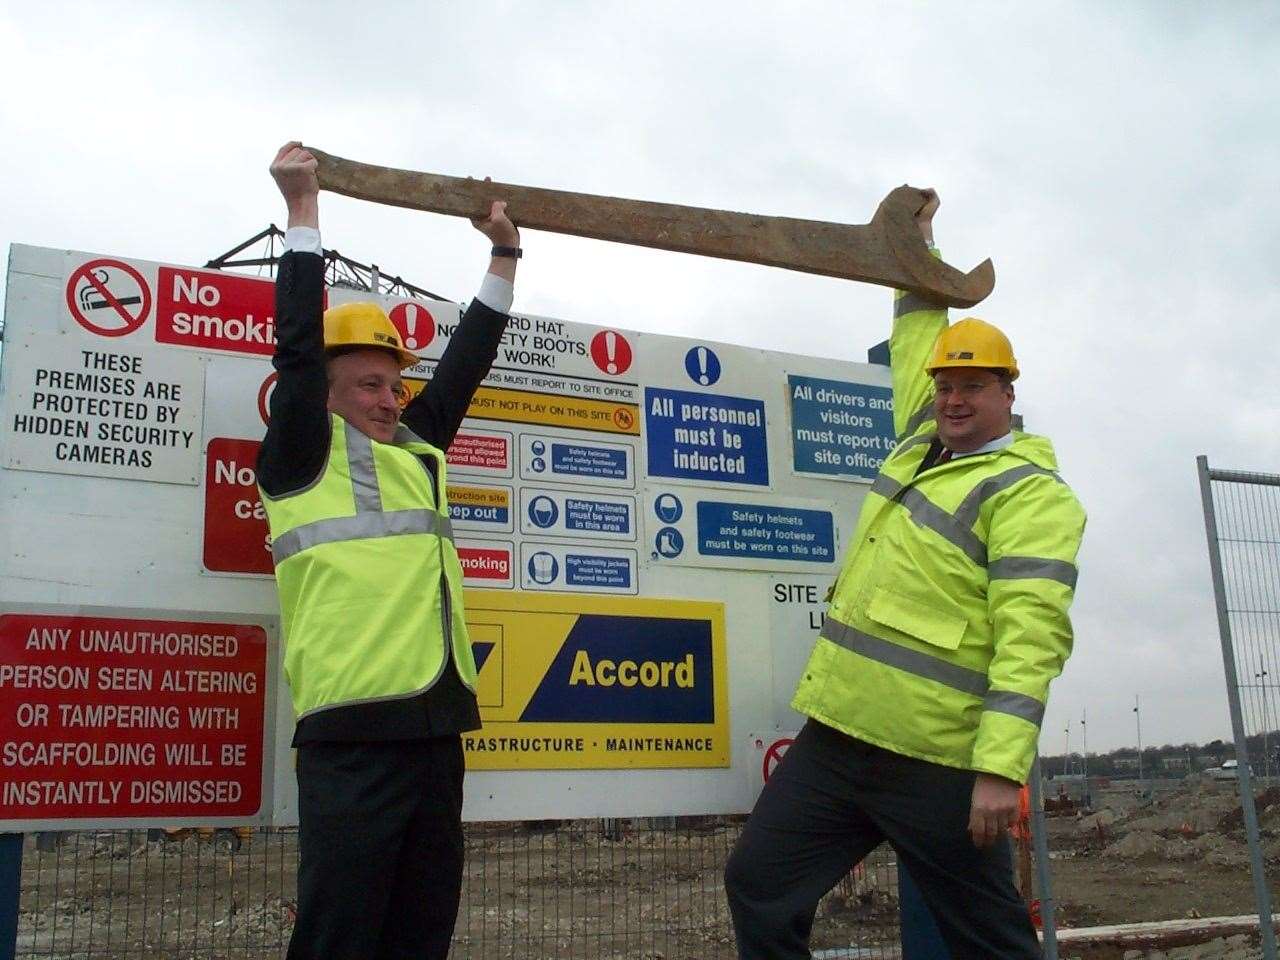 Trevor Goff of Dockside Developments, left, and Guy Shepherd, TryAccord project manager, holding a giant spanner found on site